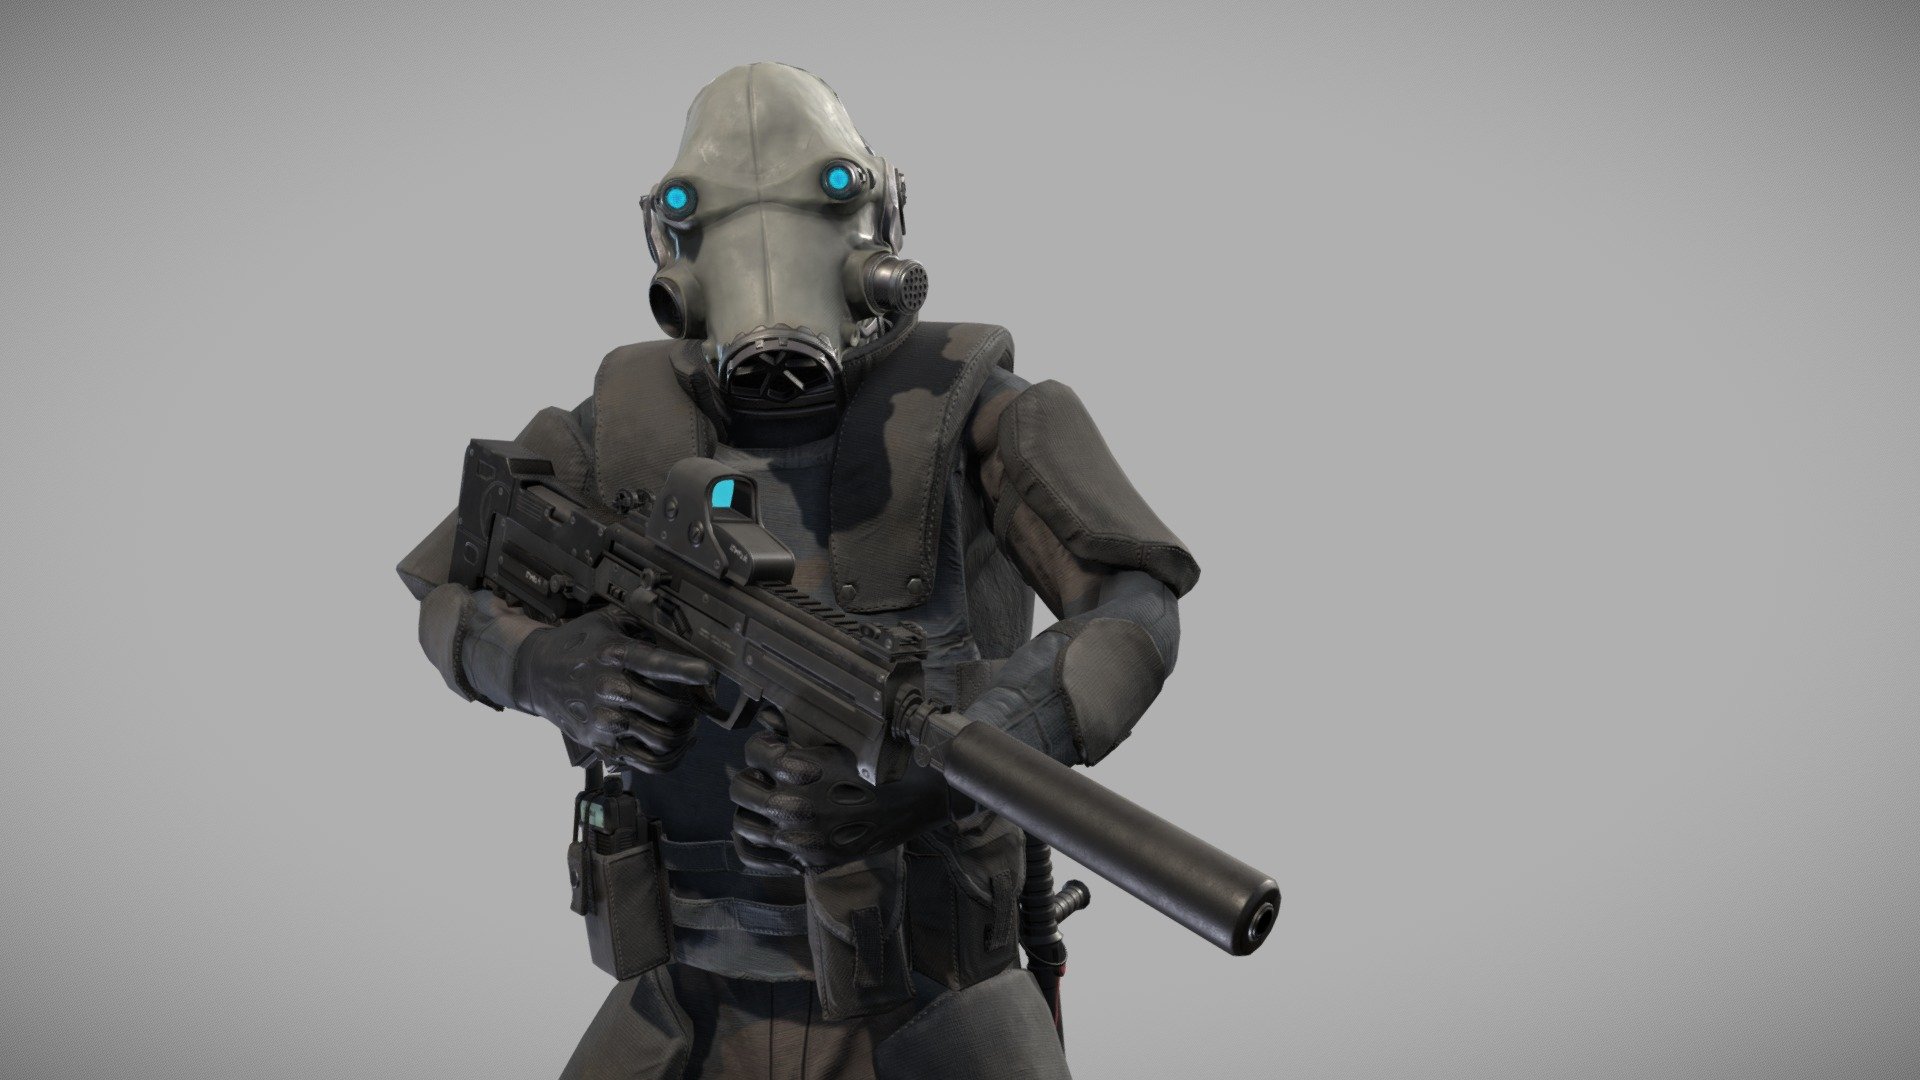 Real time pbr game model

Rigged,scinned, ready for animation or retarget animation

All poly - 30 957‬

Mesh poly - 25 573

Weapon(auto rifle and baton) poly- 5 384‬ - Special forces skifi soldier - 3D model by vrimen 3d model